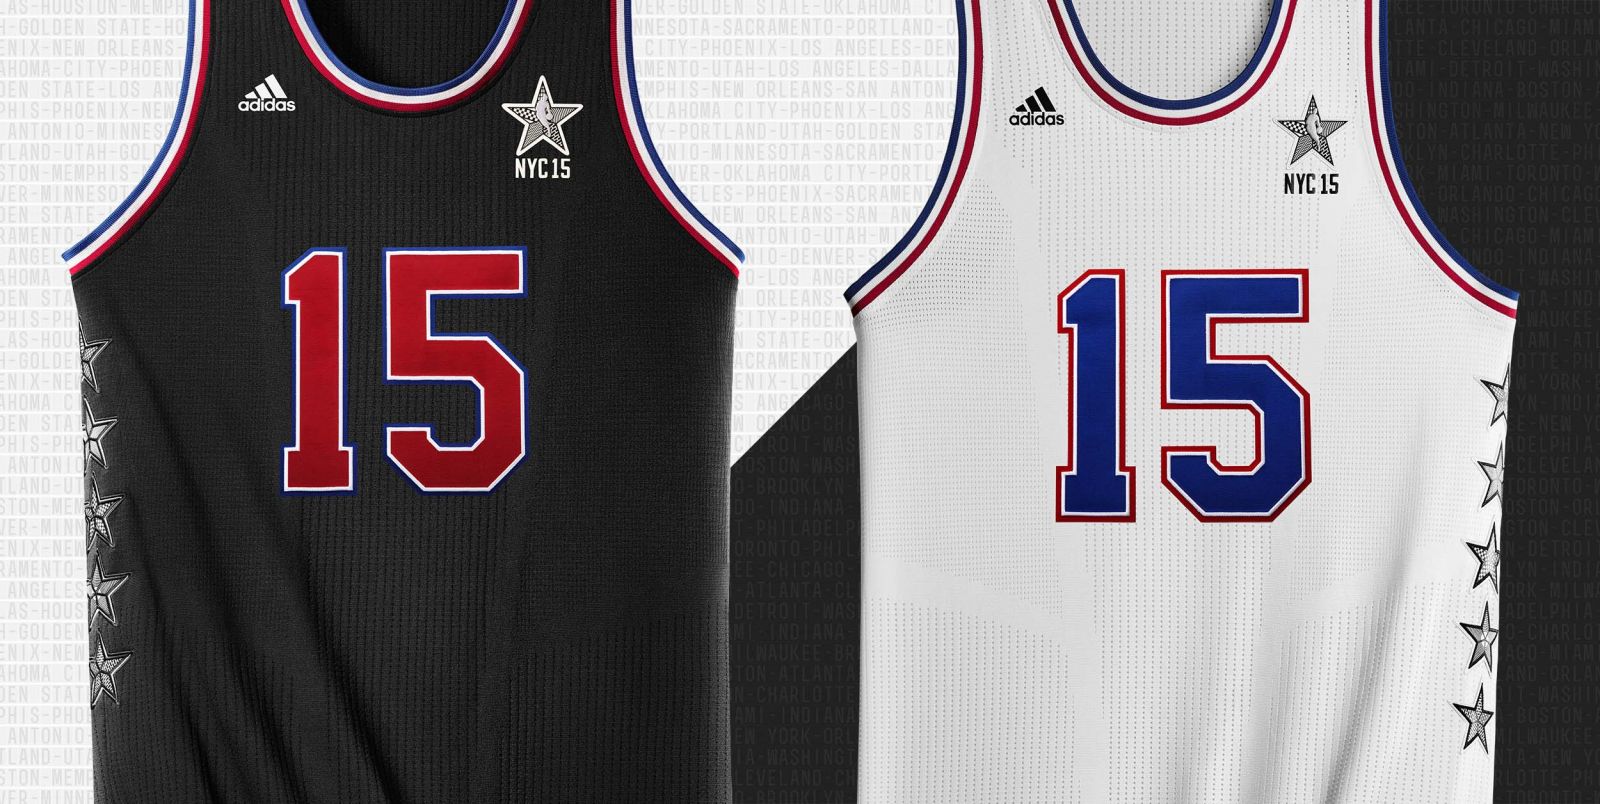 NBA reveals jerseys for Toronto All-Star game